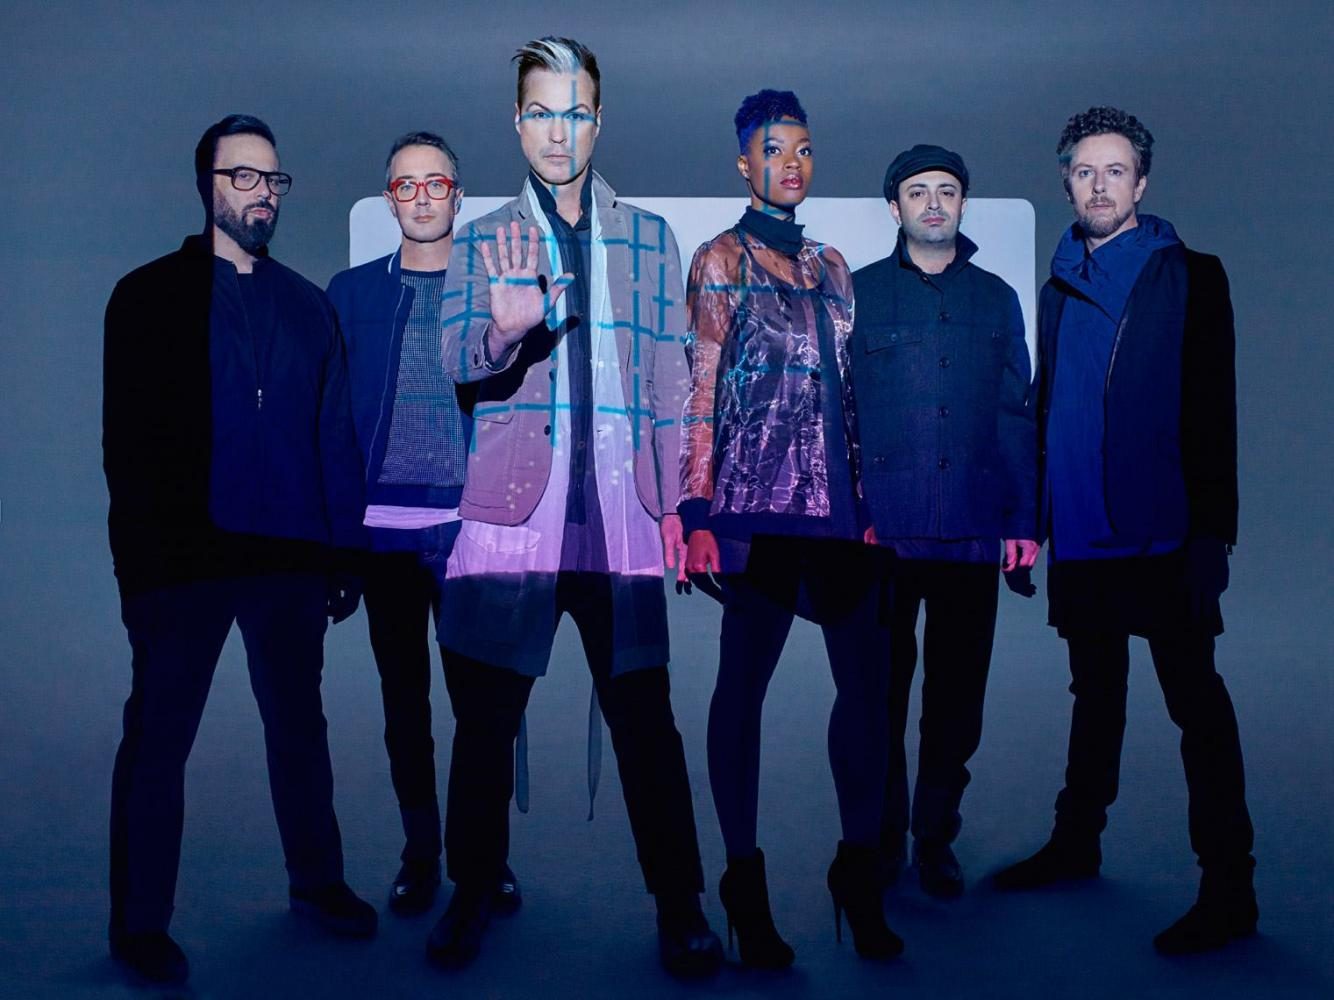 Fitz and the Tantrums handclap their way to Homecoming.